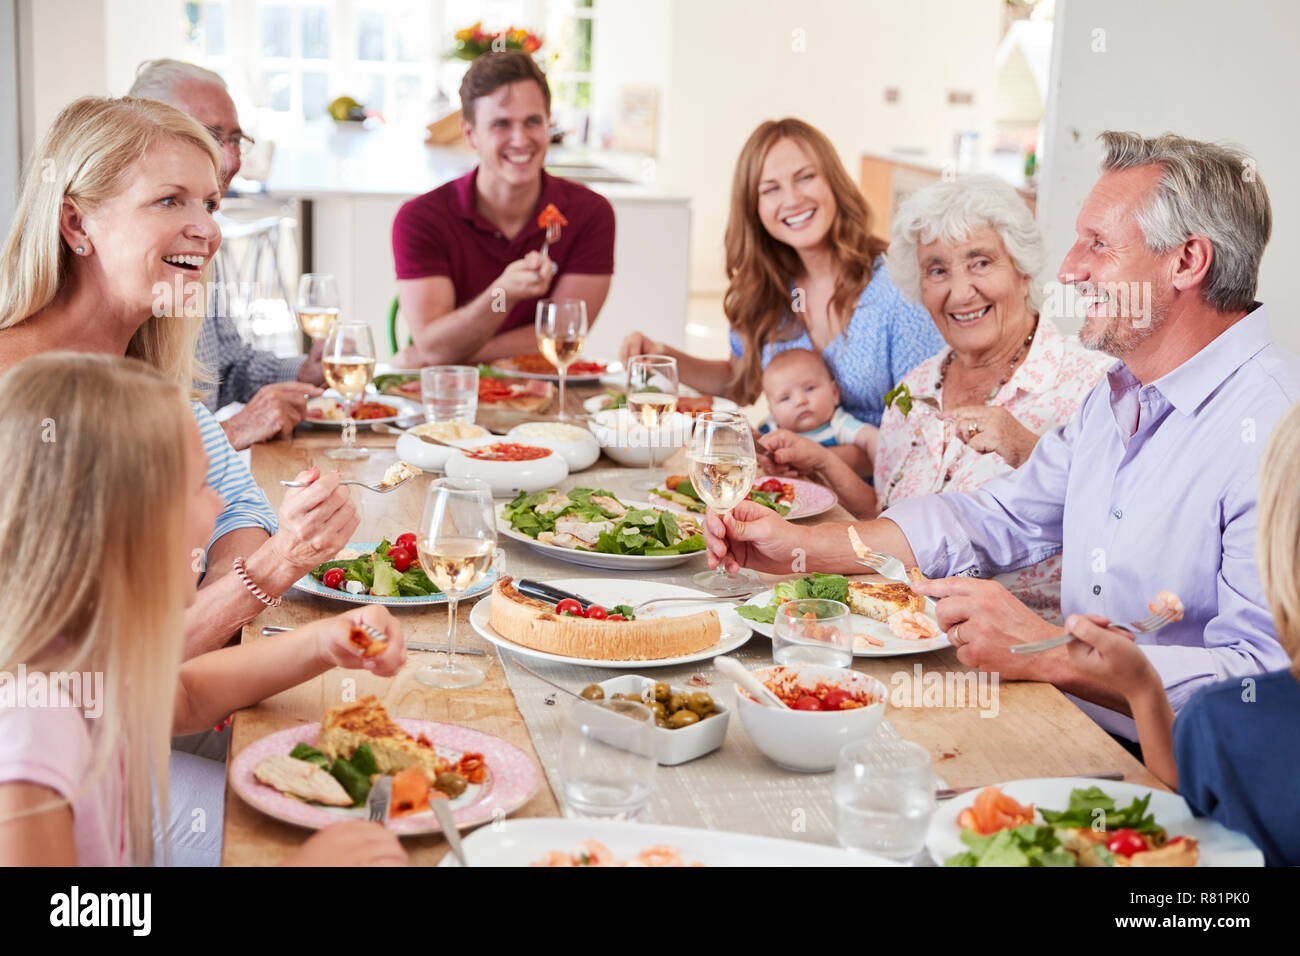 Group Of Multi-Generation Family And Friends Sitting Around Table And Making A Toast Stock Photo